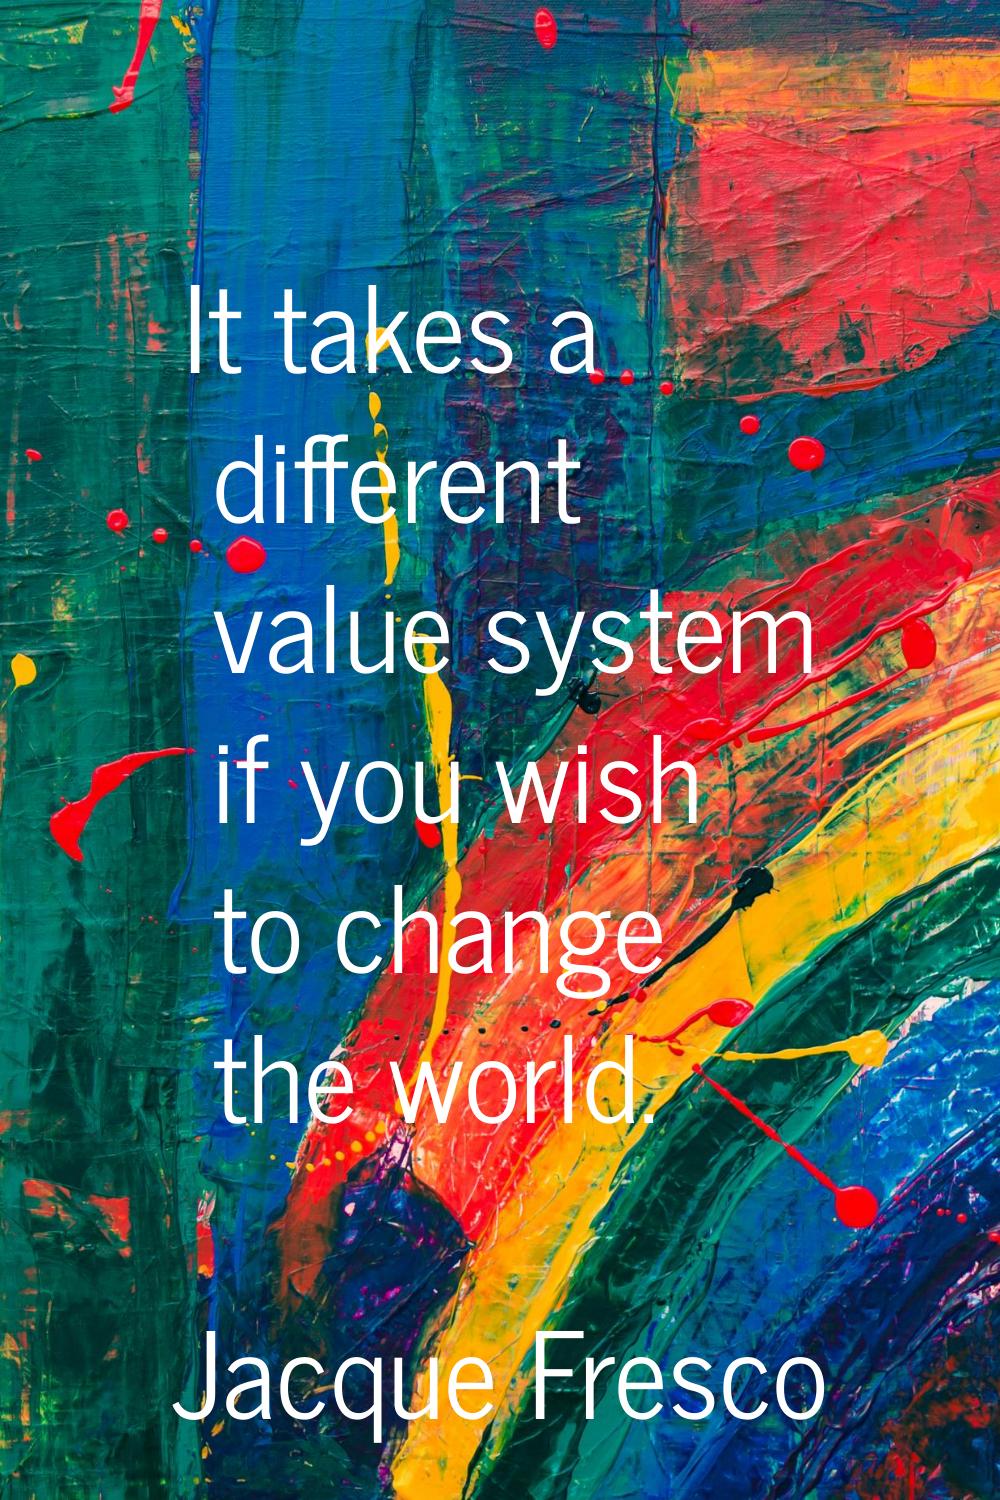 It takes a different value system if you wish to change the world.